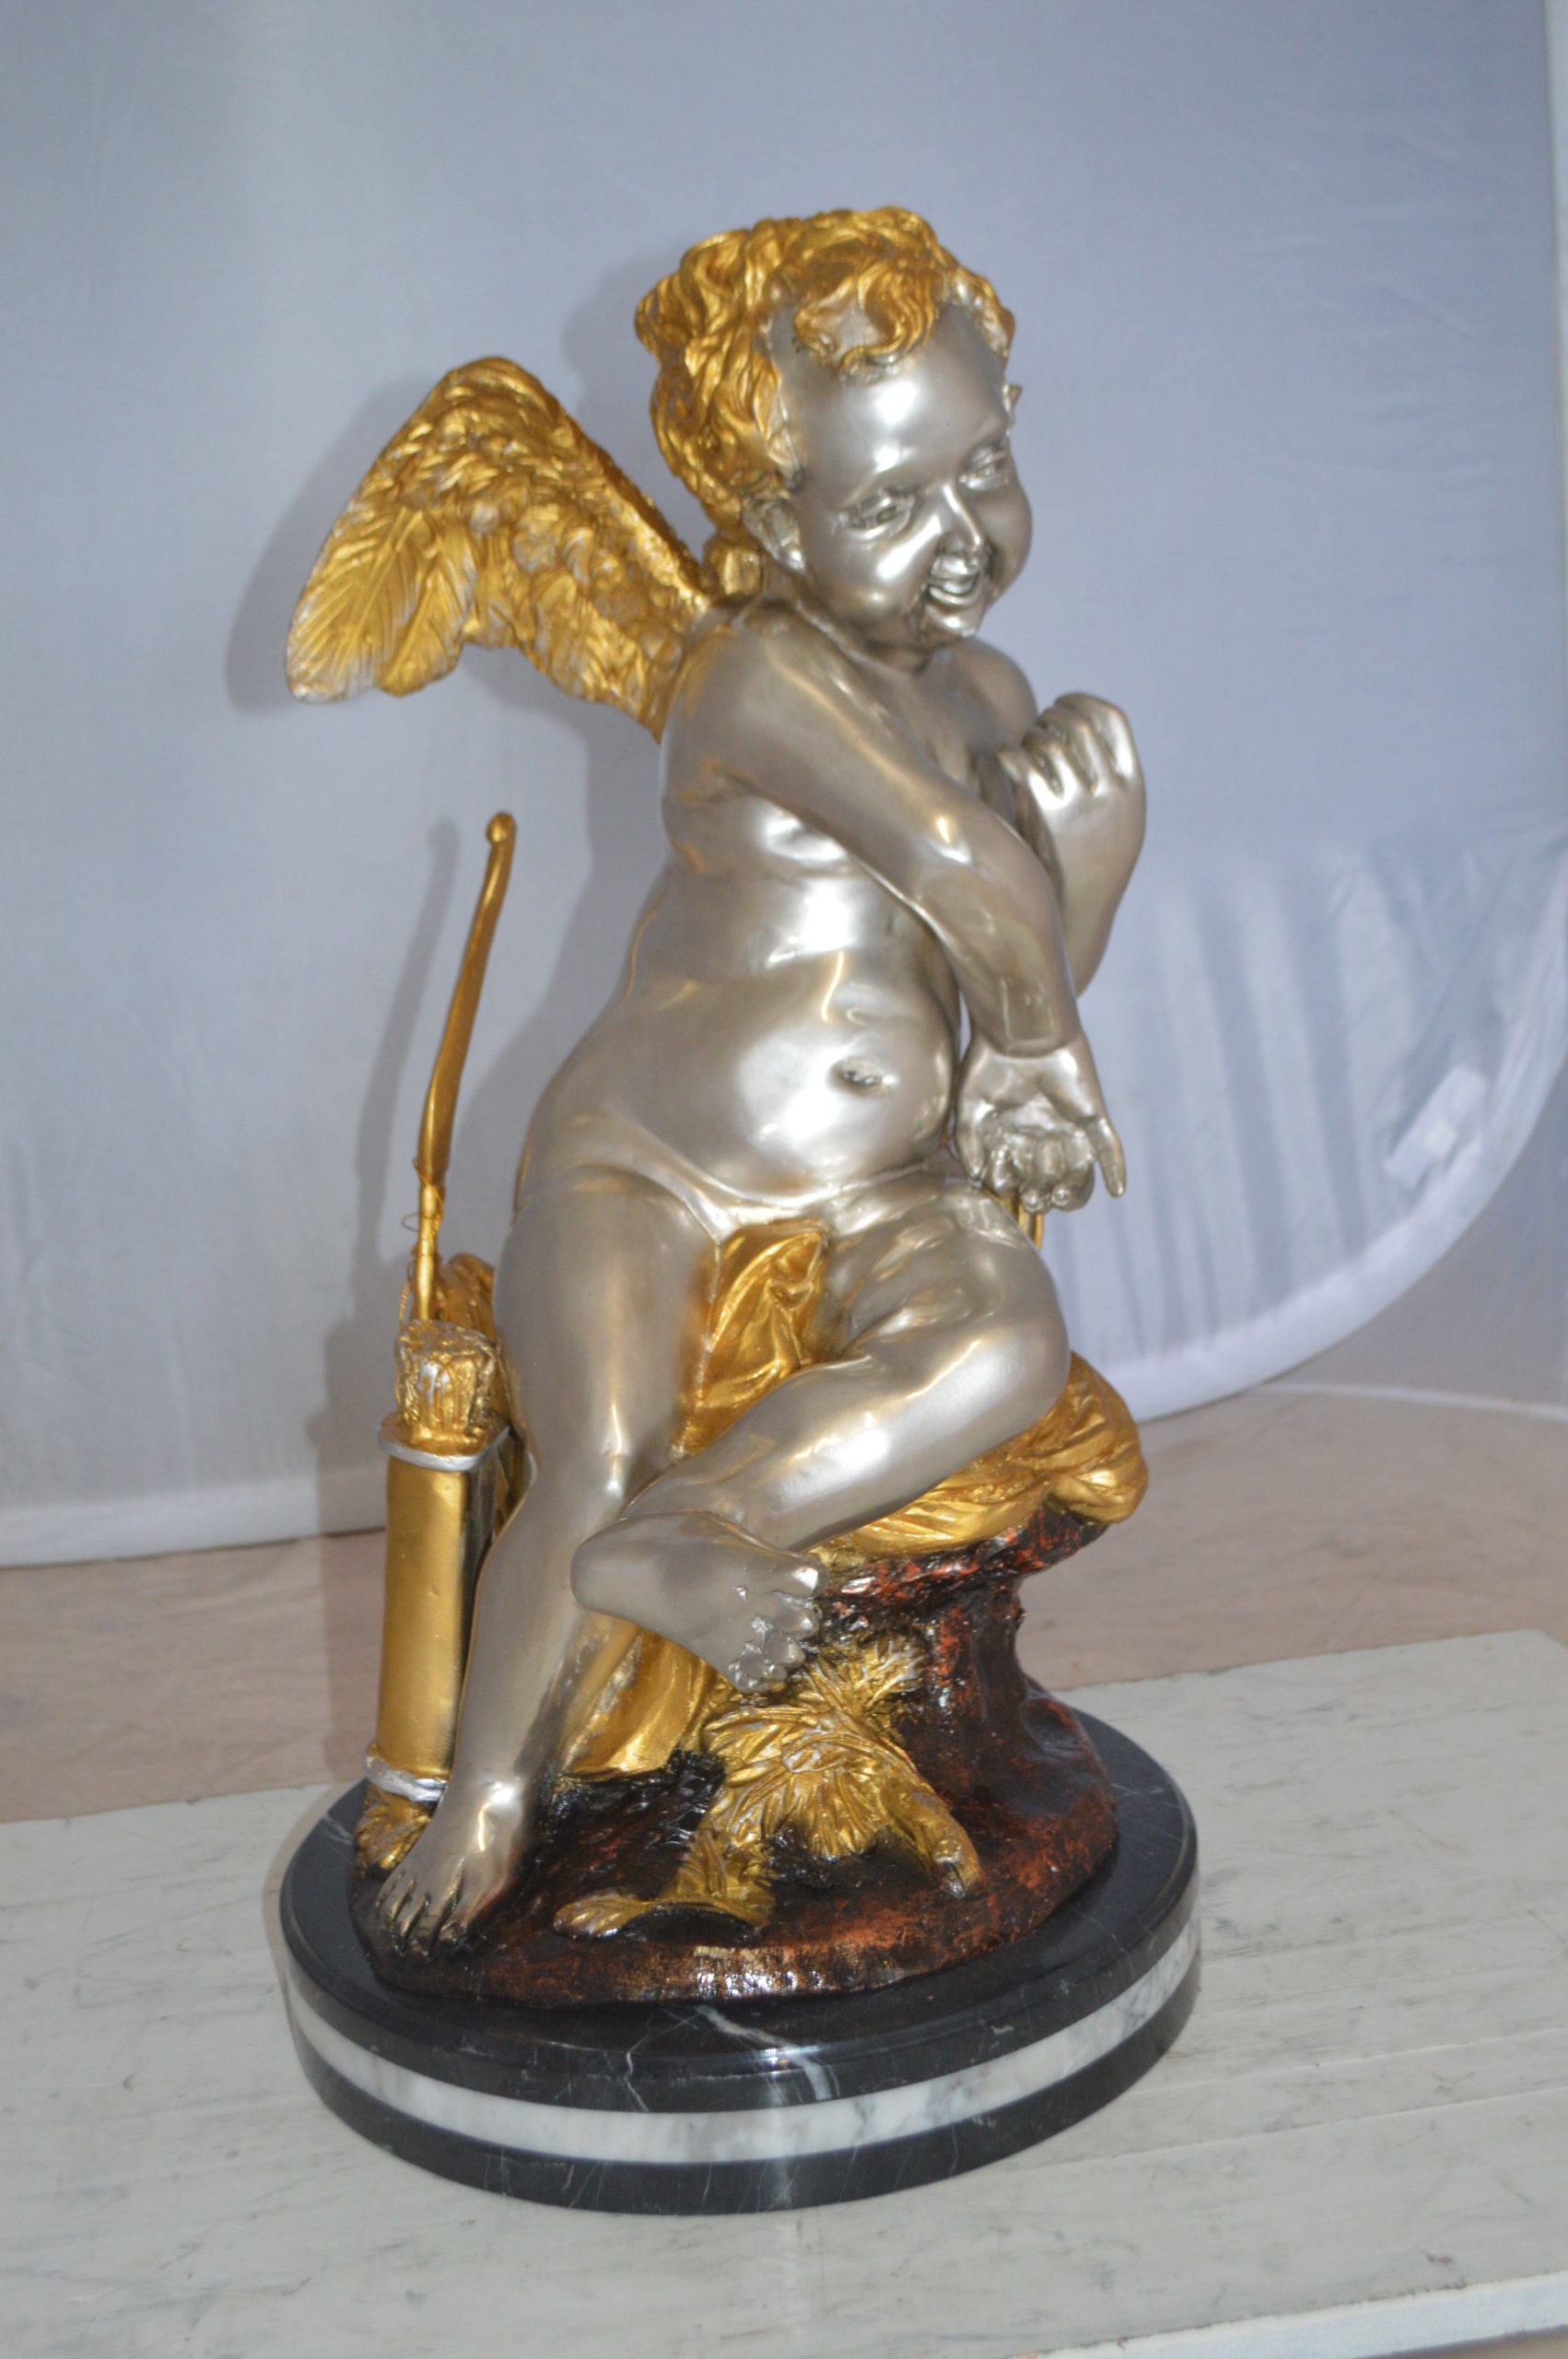 Nifao Cupid Girl On A Rock Bronze Statue - Size: 20"L x 15"W x 25"H. - image 3 of 14